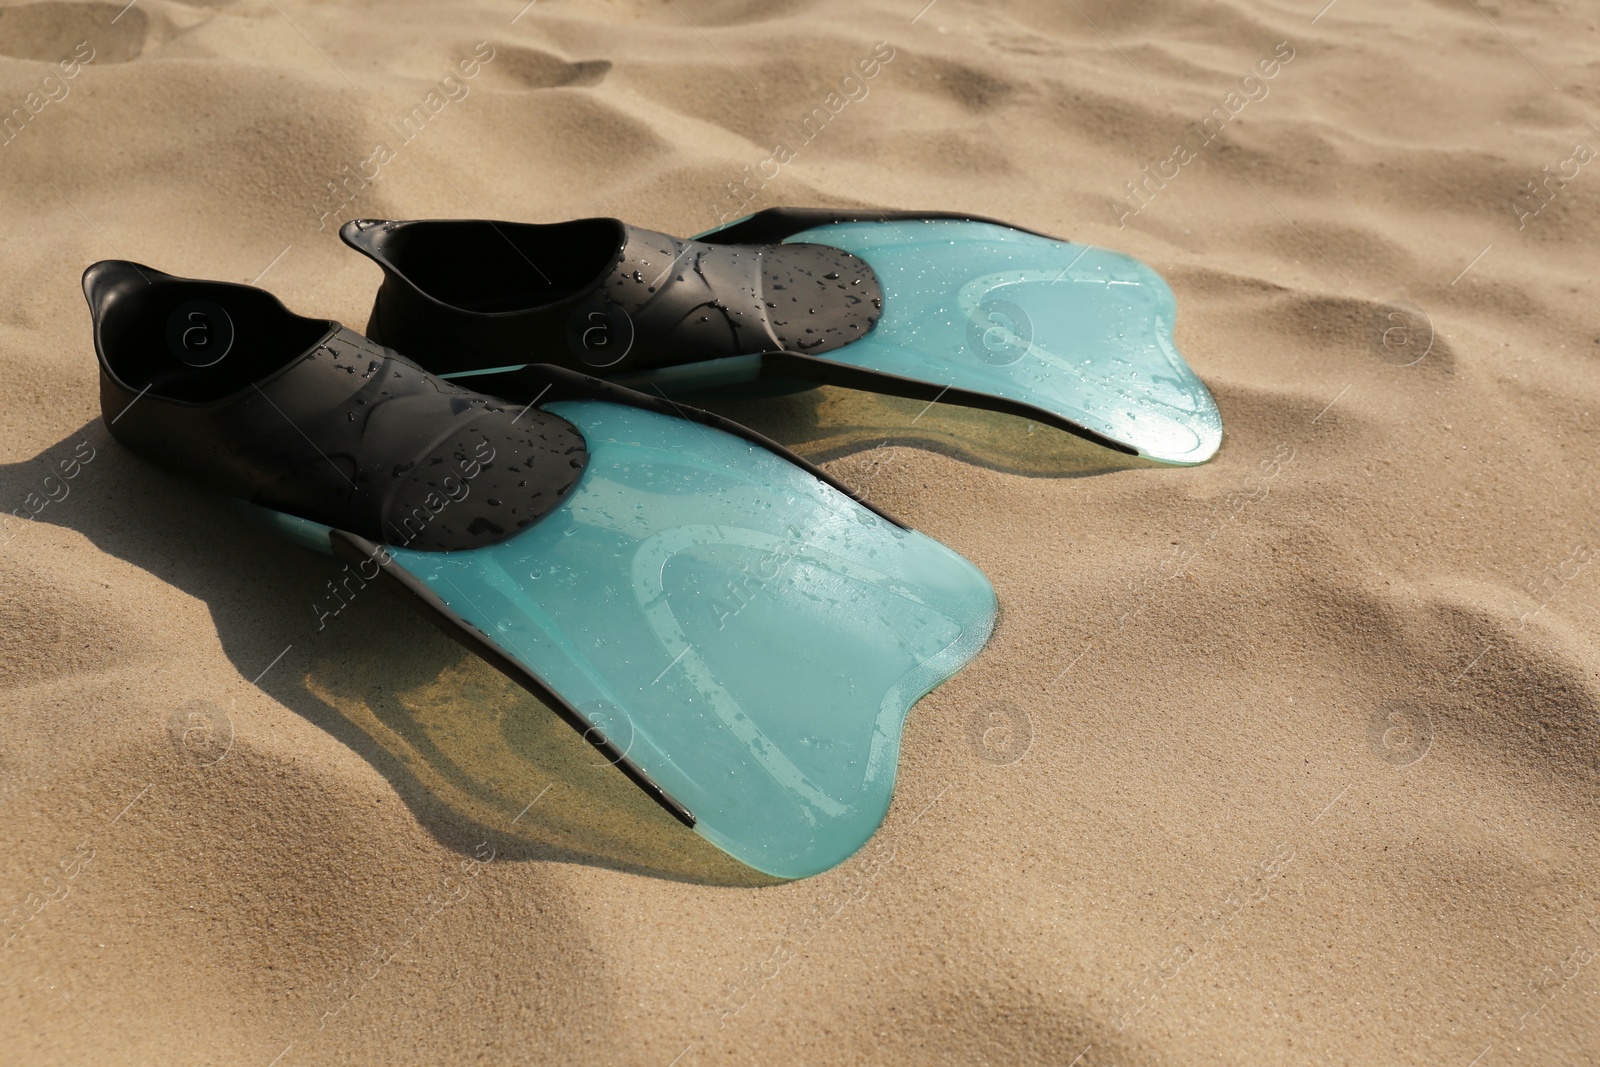 Photo of Pair of turquoise flippers with water drops on sand, closeup